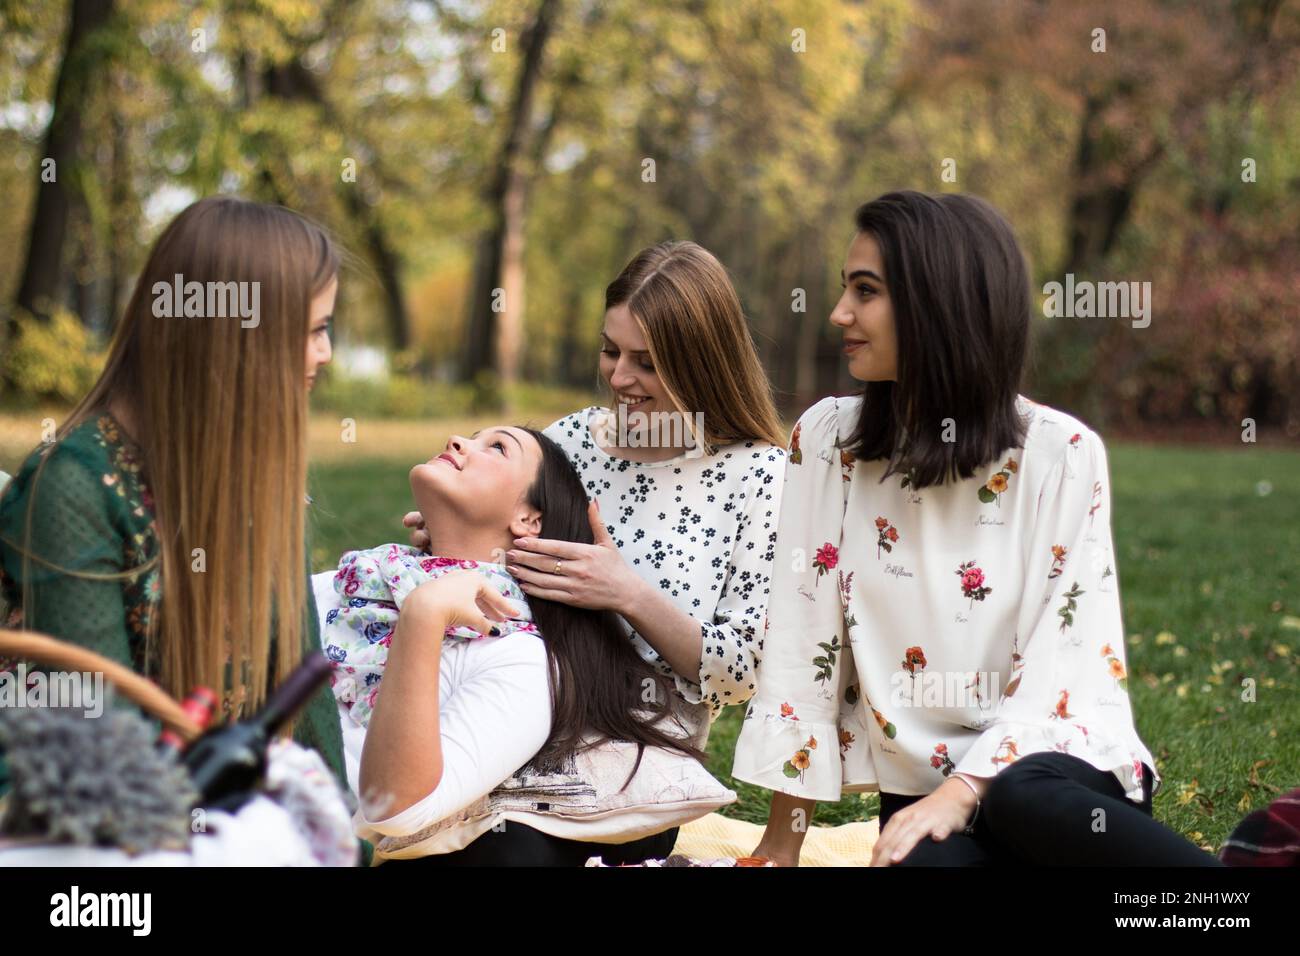 Group of four women on a fun fall picnic in the park, having a good time. Stock Photo